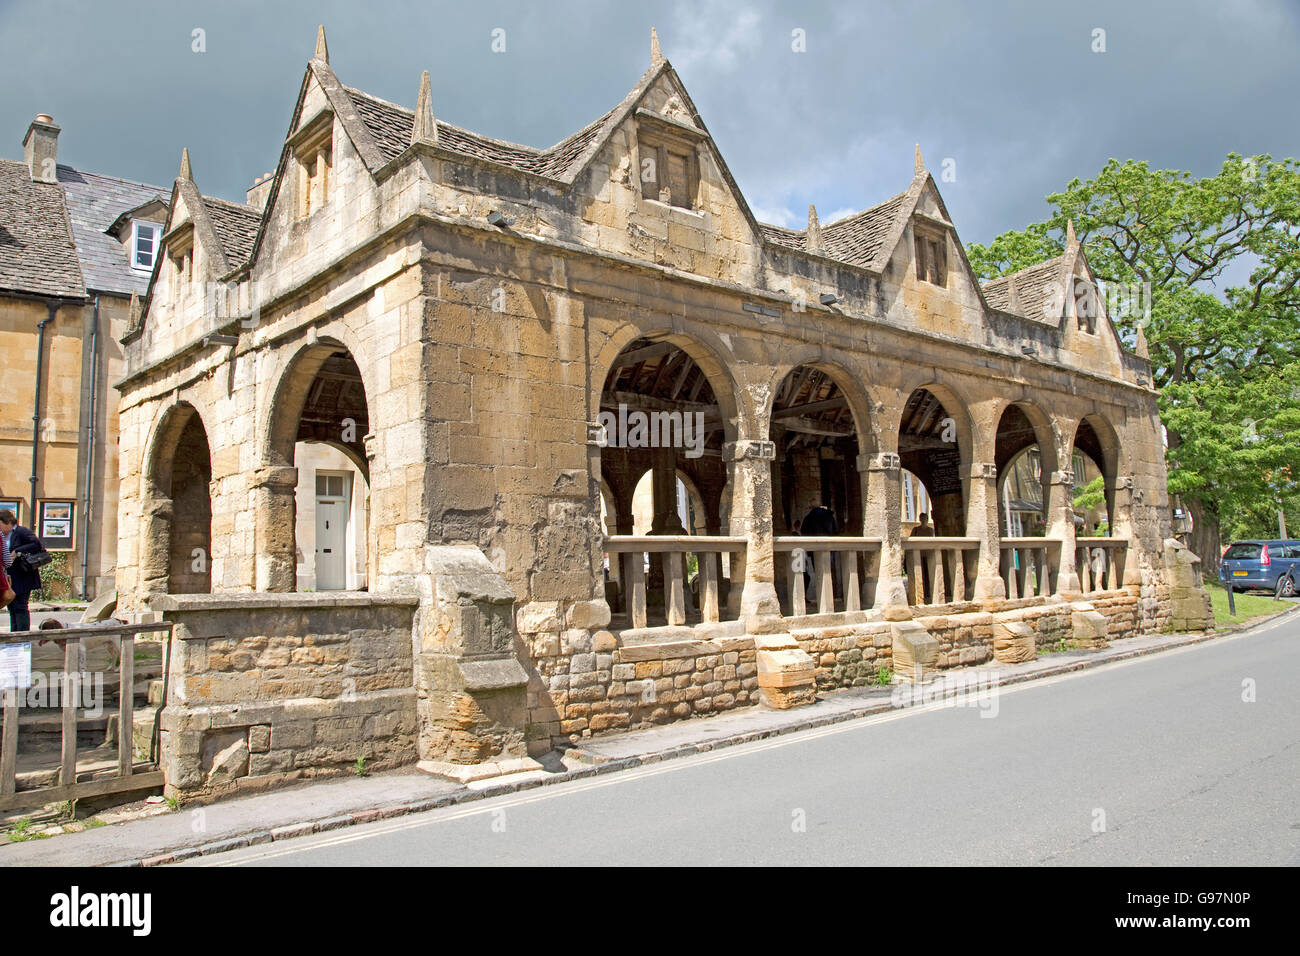 Market Hall high street Chipping Campden UK Cotswolds Banque D'Images